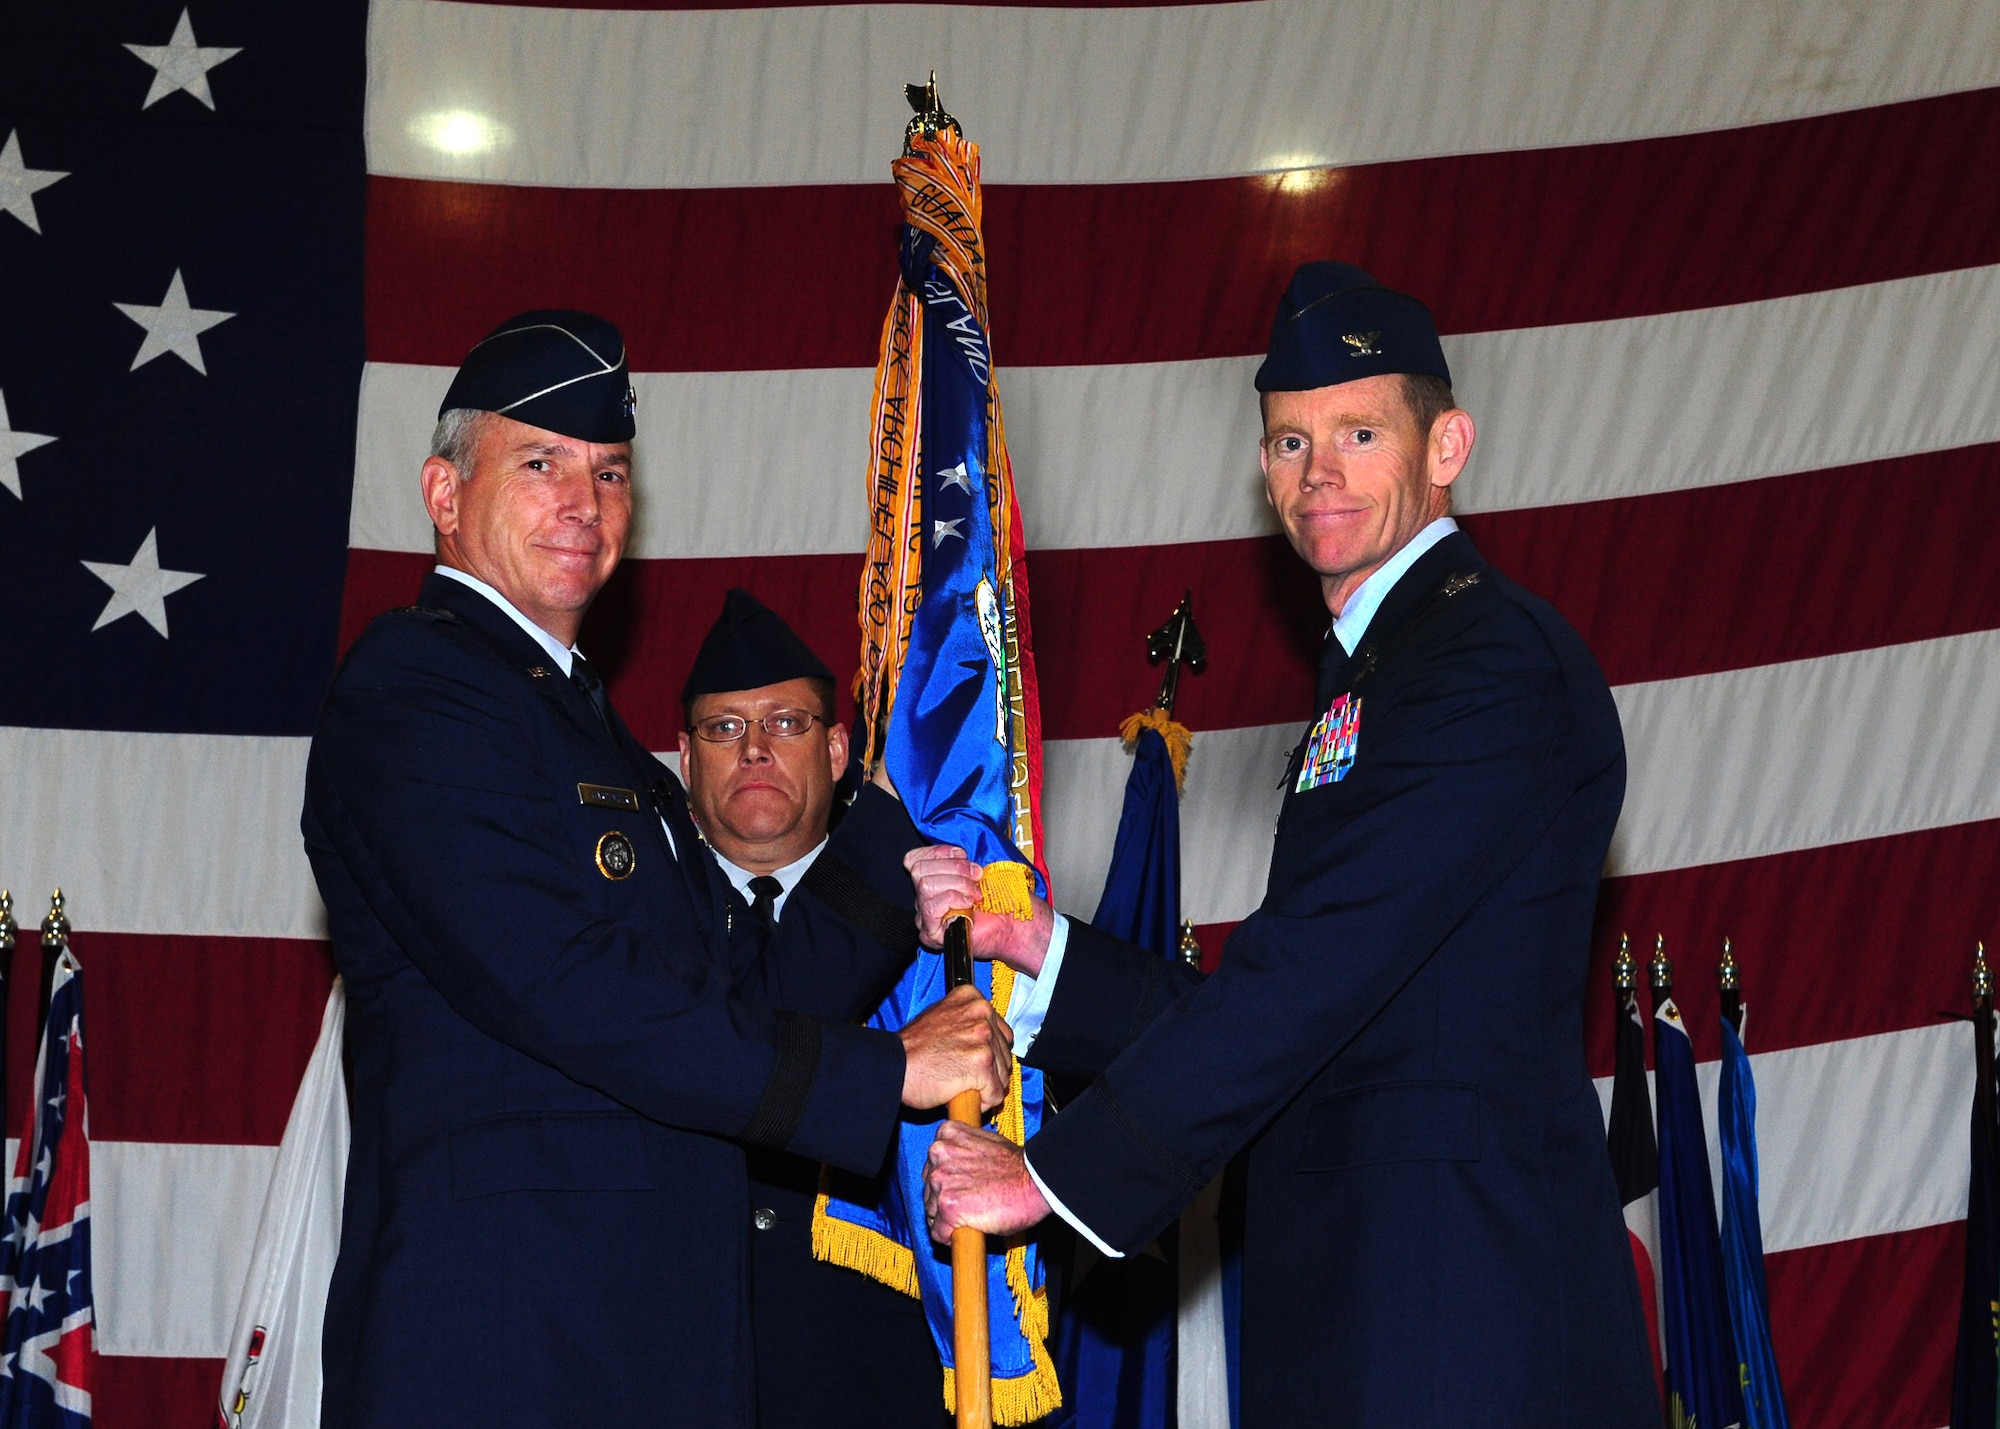 MINOT AIR FORCE BASE, N.D. -- Maj. Gen. Floyd Carpenter, 8th Air Force commander, passes the 5th Bomb Wing guidon to Col. James Dawkins as he assumes command May 31.  Colonel Dawkins will lead as the 51st commander of the 5th Bomb Wing “Warbirds.” The change of command ceremony is one of the Air Force’s time-honored traditions. (U.S. Air Force photo/Senior Airman Michael J. Veloz)